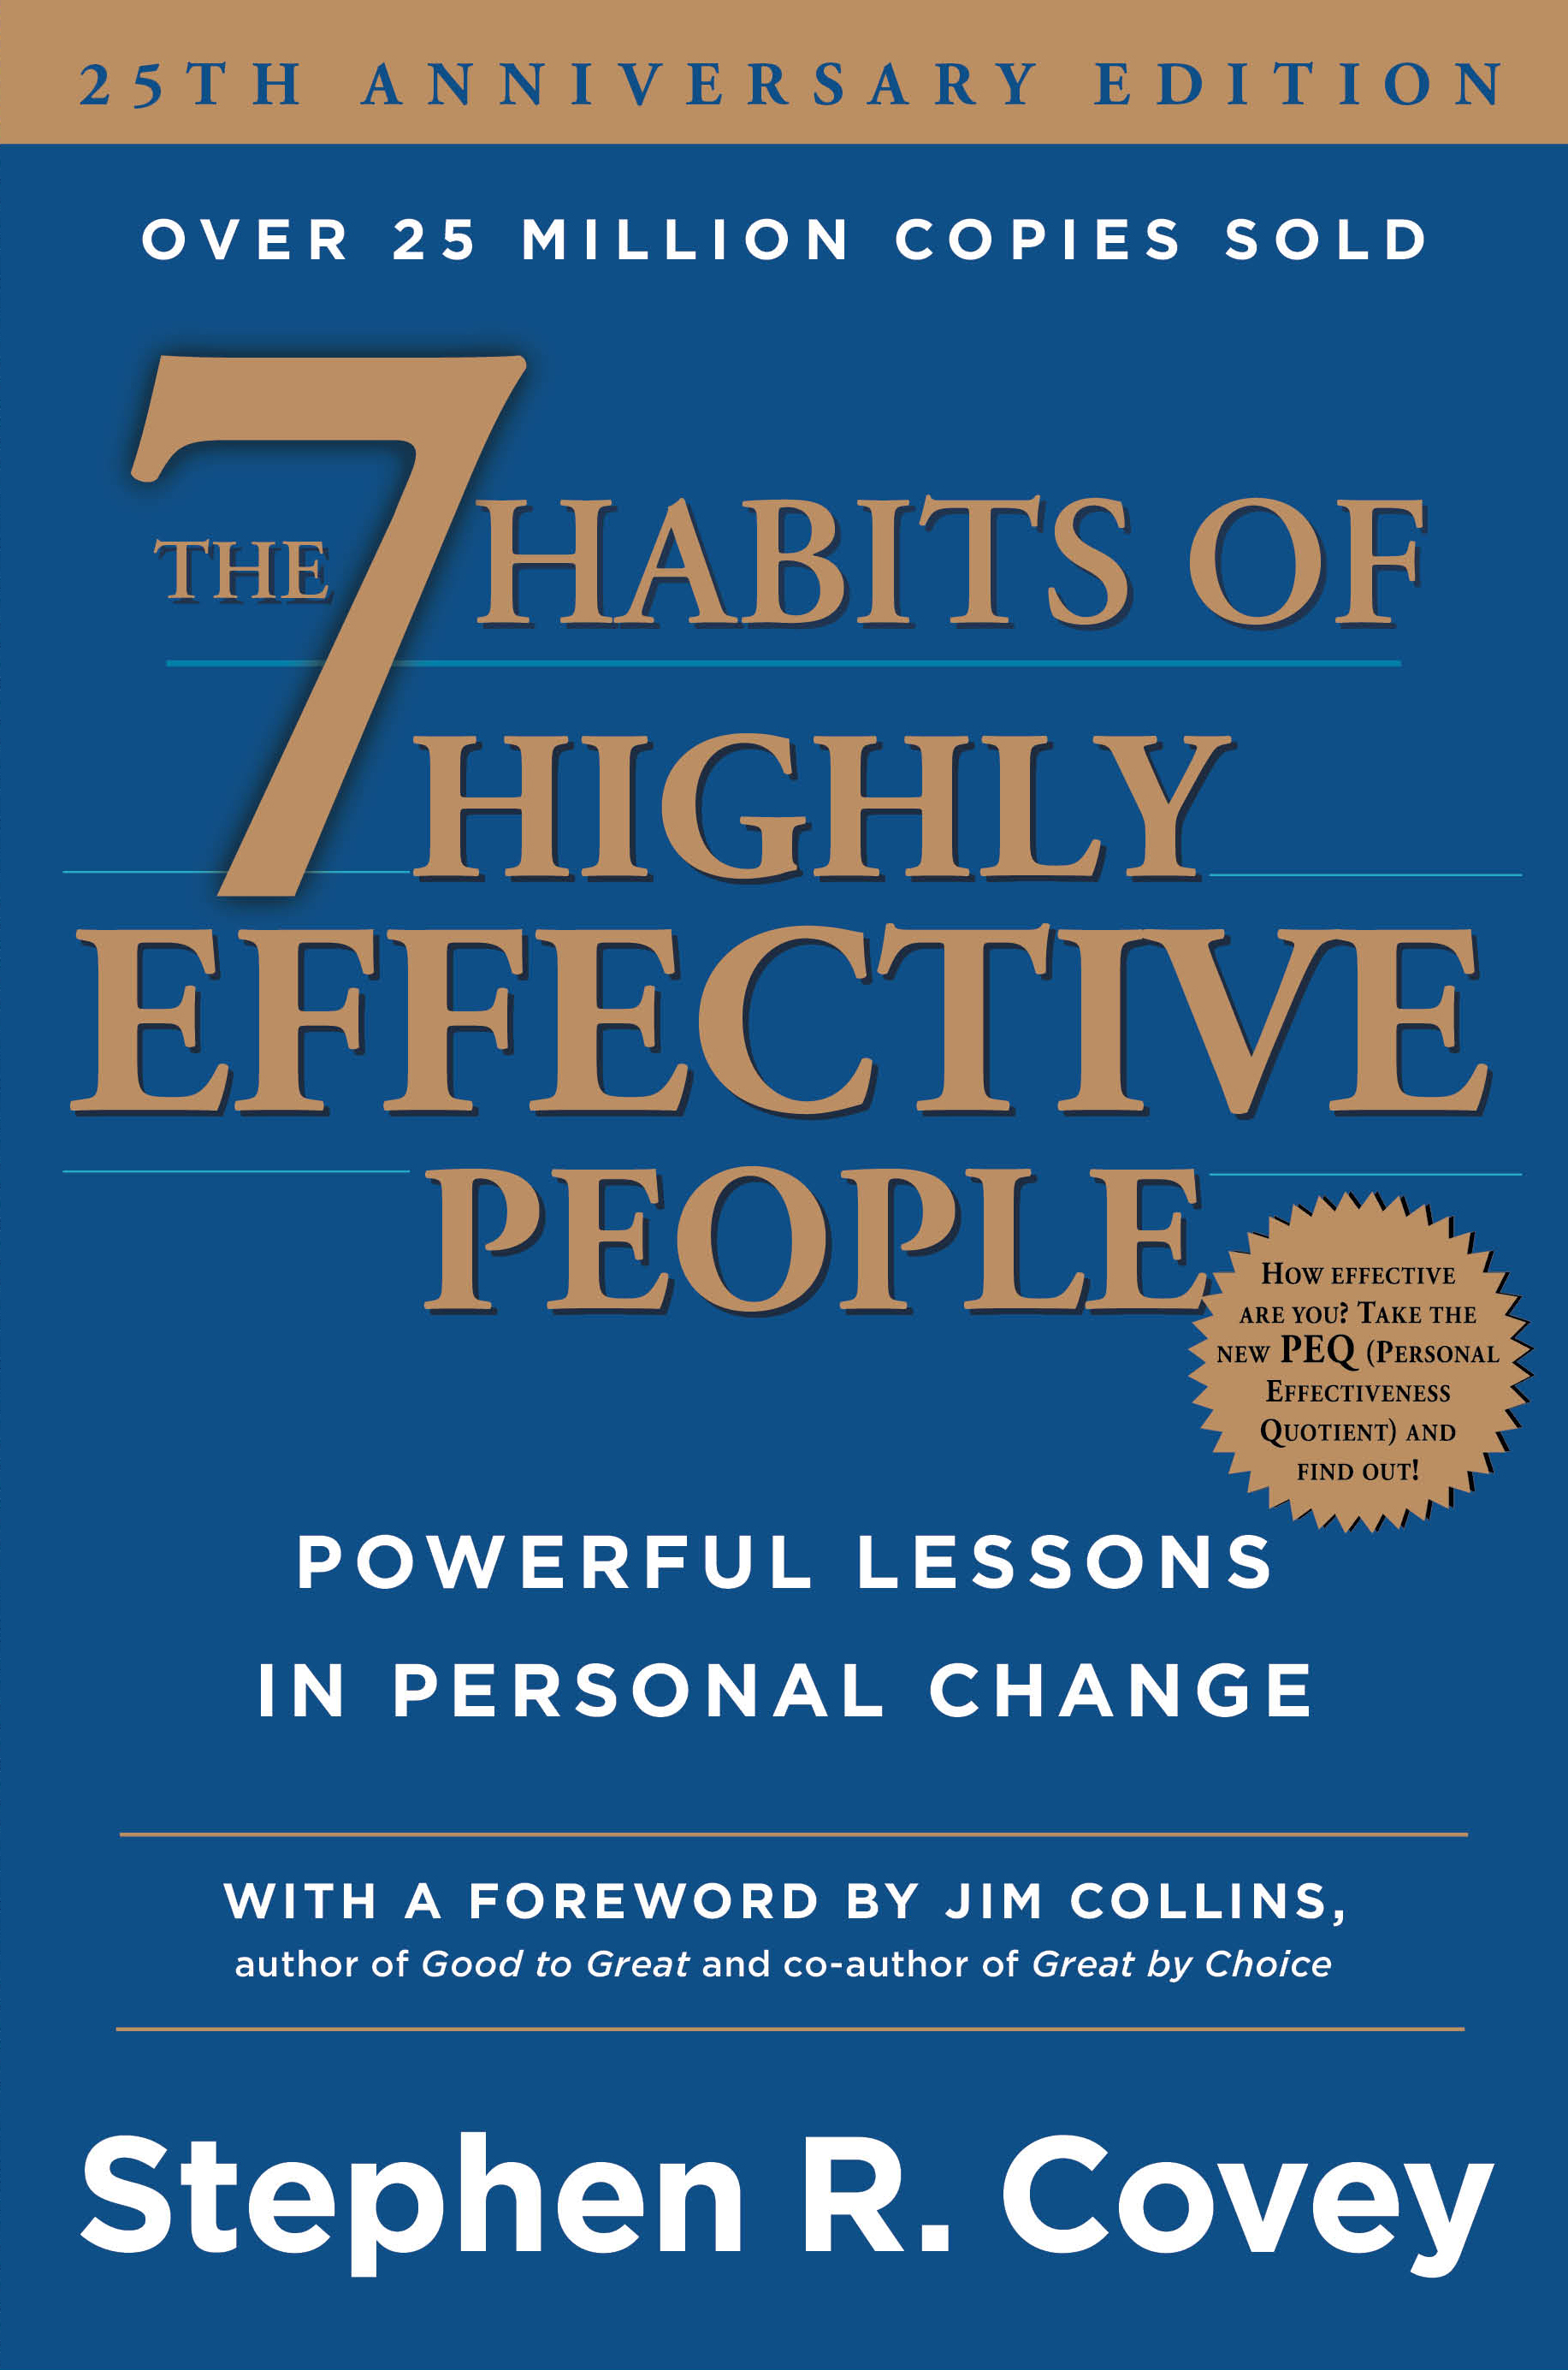 7-habits-highly-effective-people-book-cover